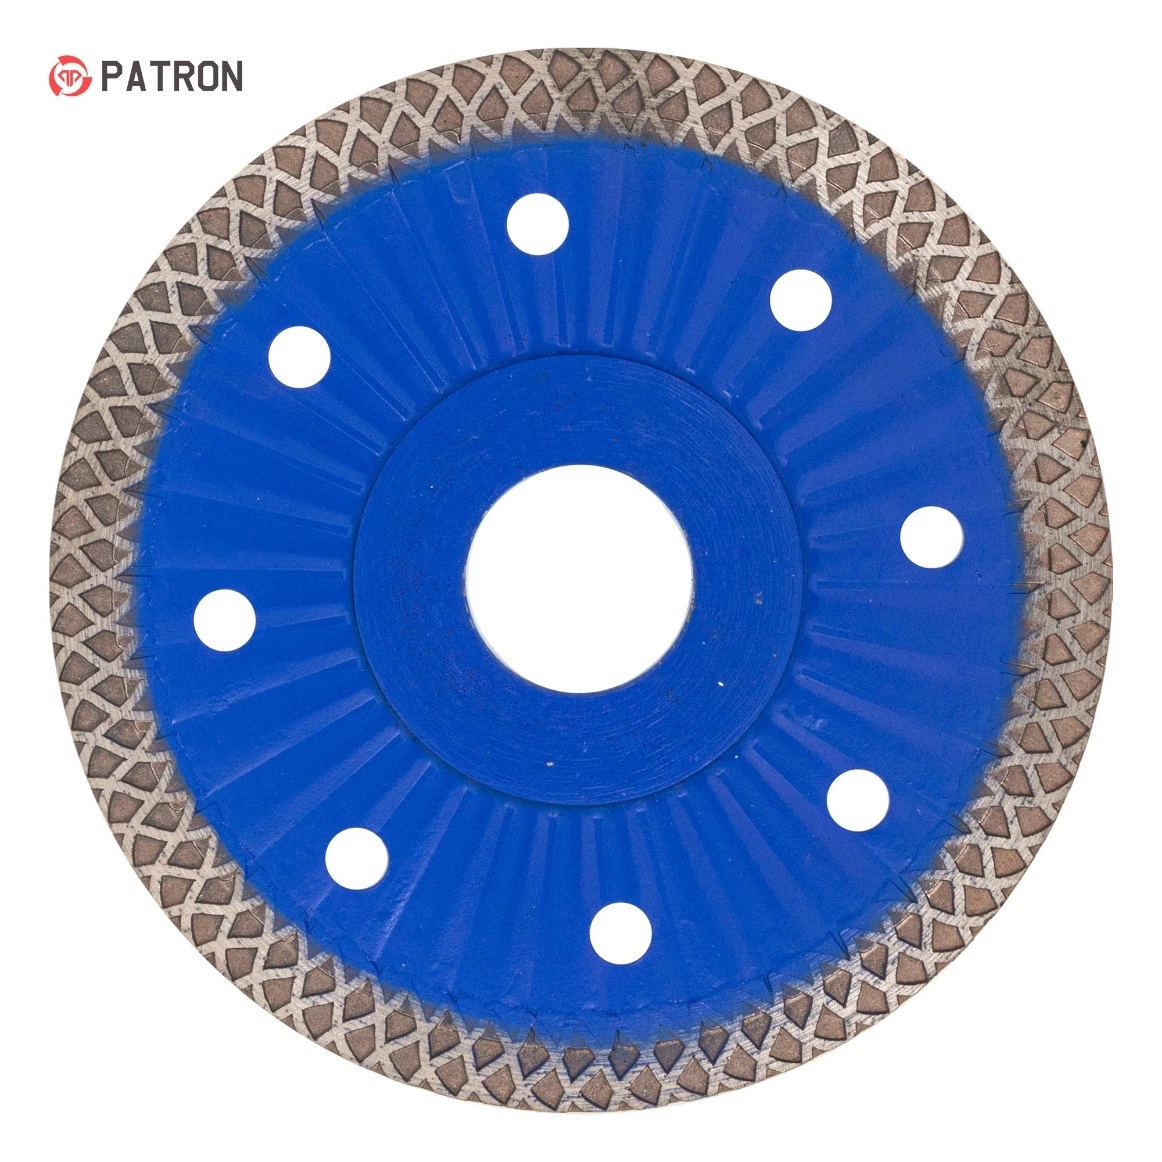 High quality/High cost performance  Resin Hardware Metal Stainless Steel Cutting Wheel Cutting Disc